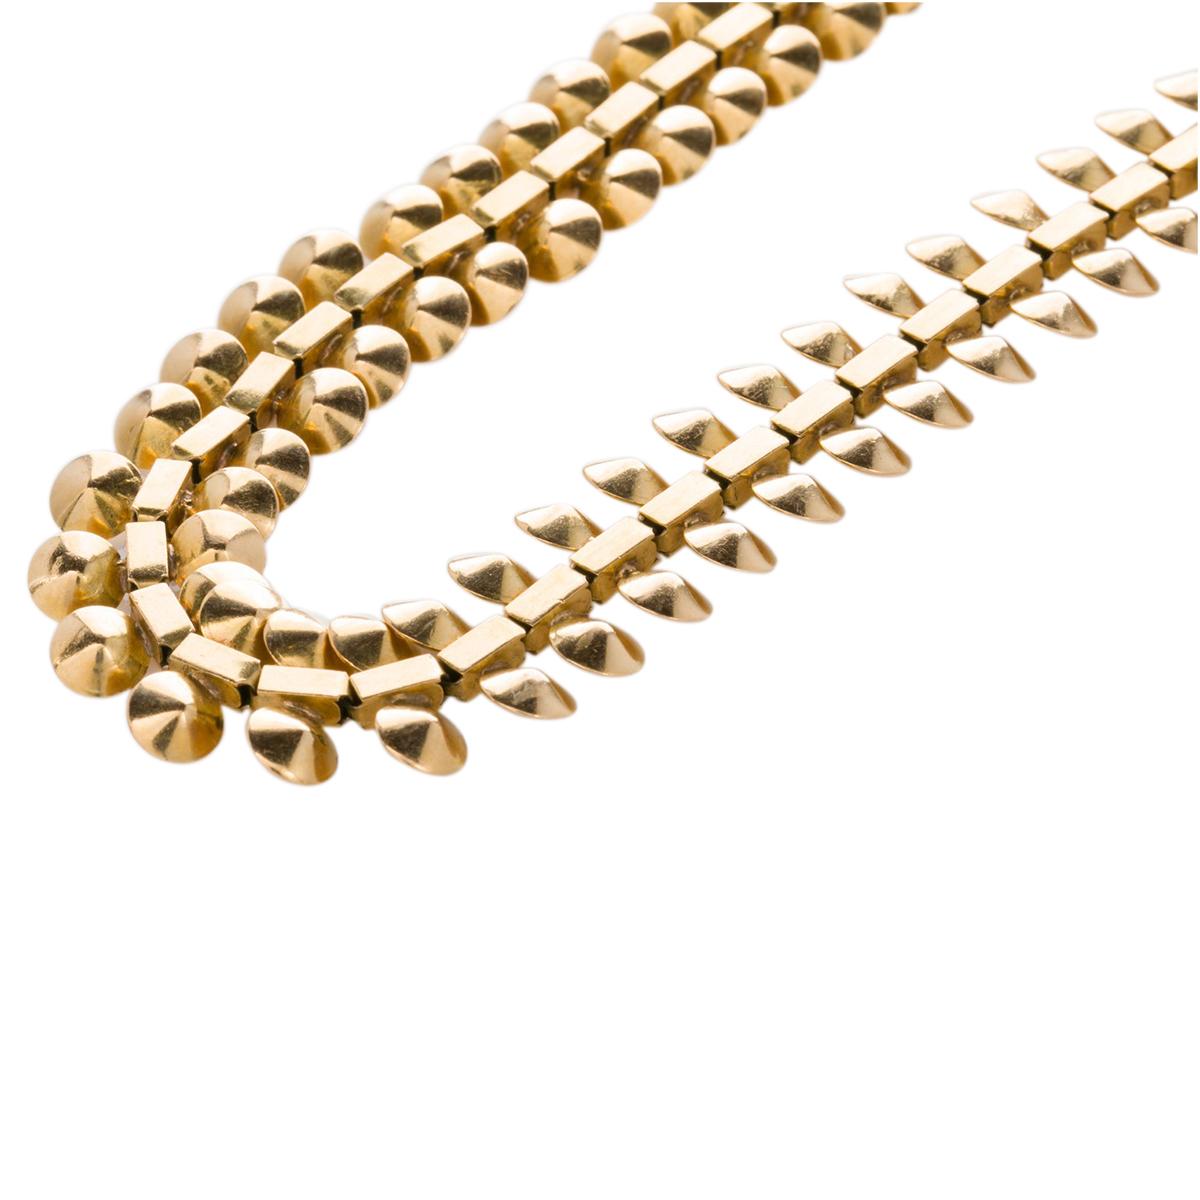 Looking for a necklace that is good for every occasion that is different and will get lots of attention without being too over the top? This might be just what you are looking for. A stunning French 18k yellow gold ornate chain that is a combination